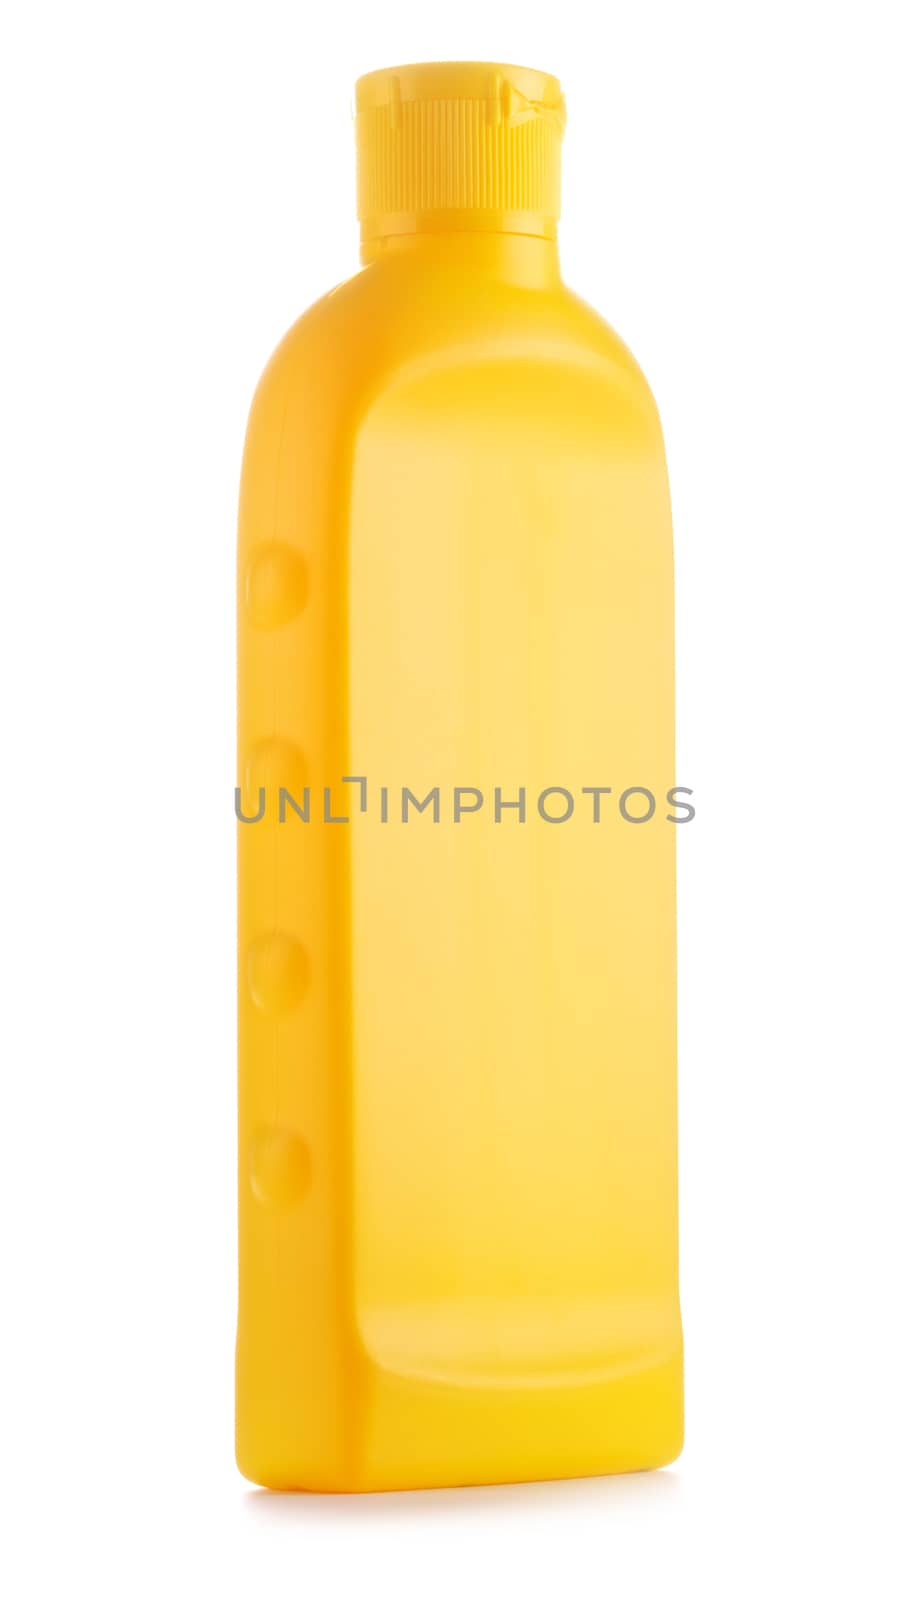 plastic bottles of cleaning products, isolated on white